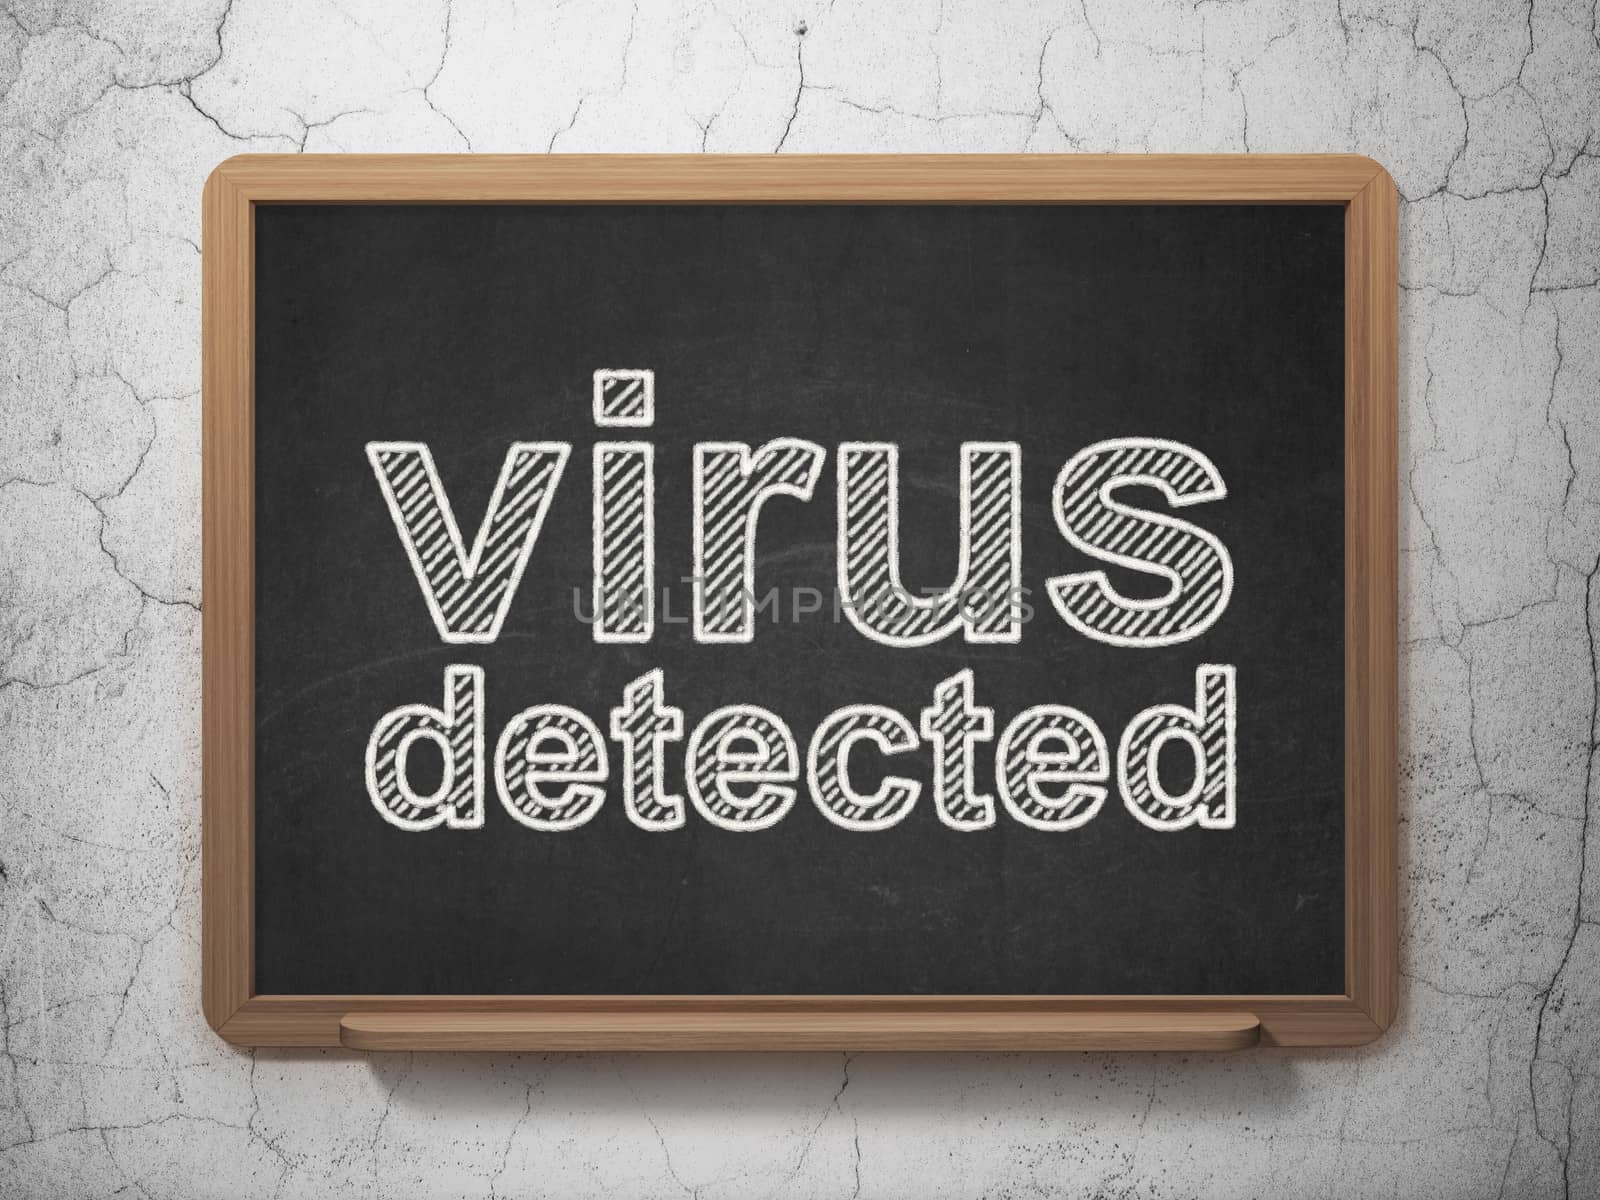 Protection concept: text Virus Detected on Black chalkboard on grunge wall background, 3d render